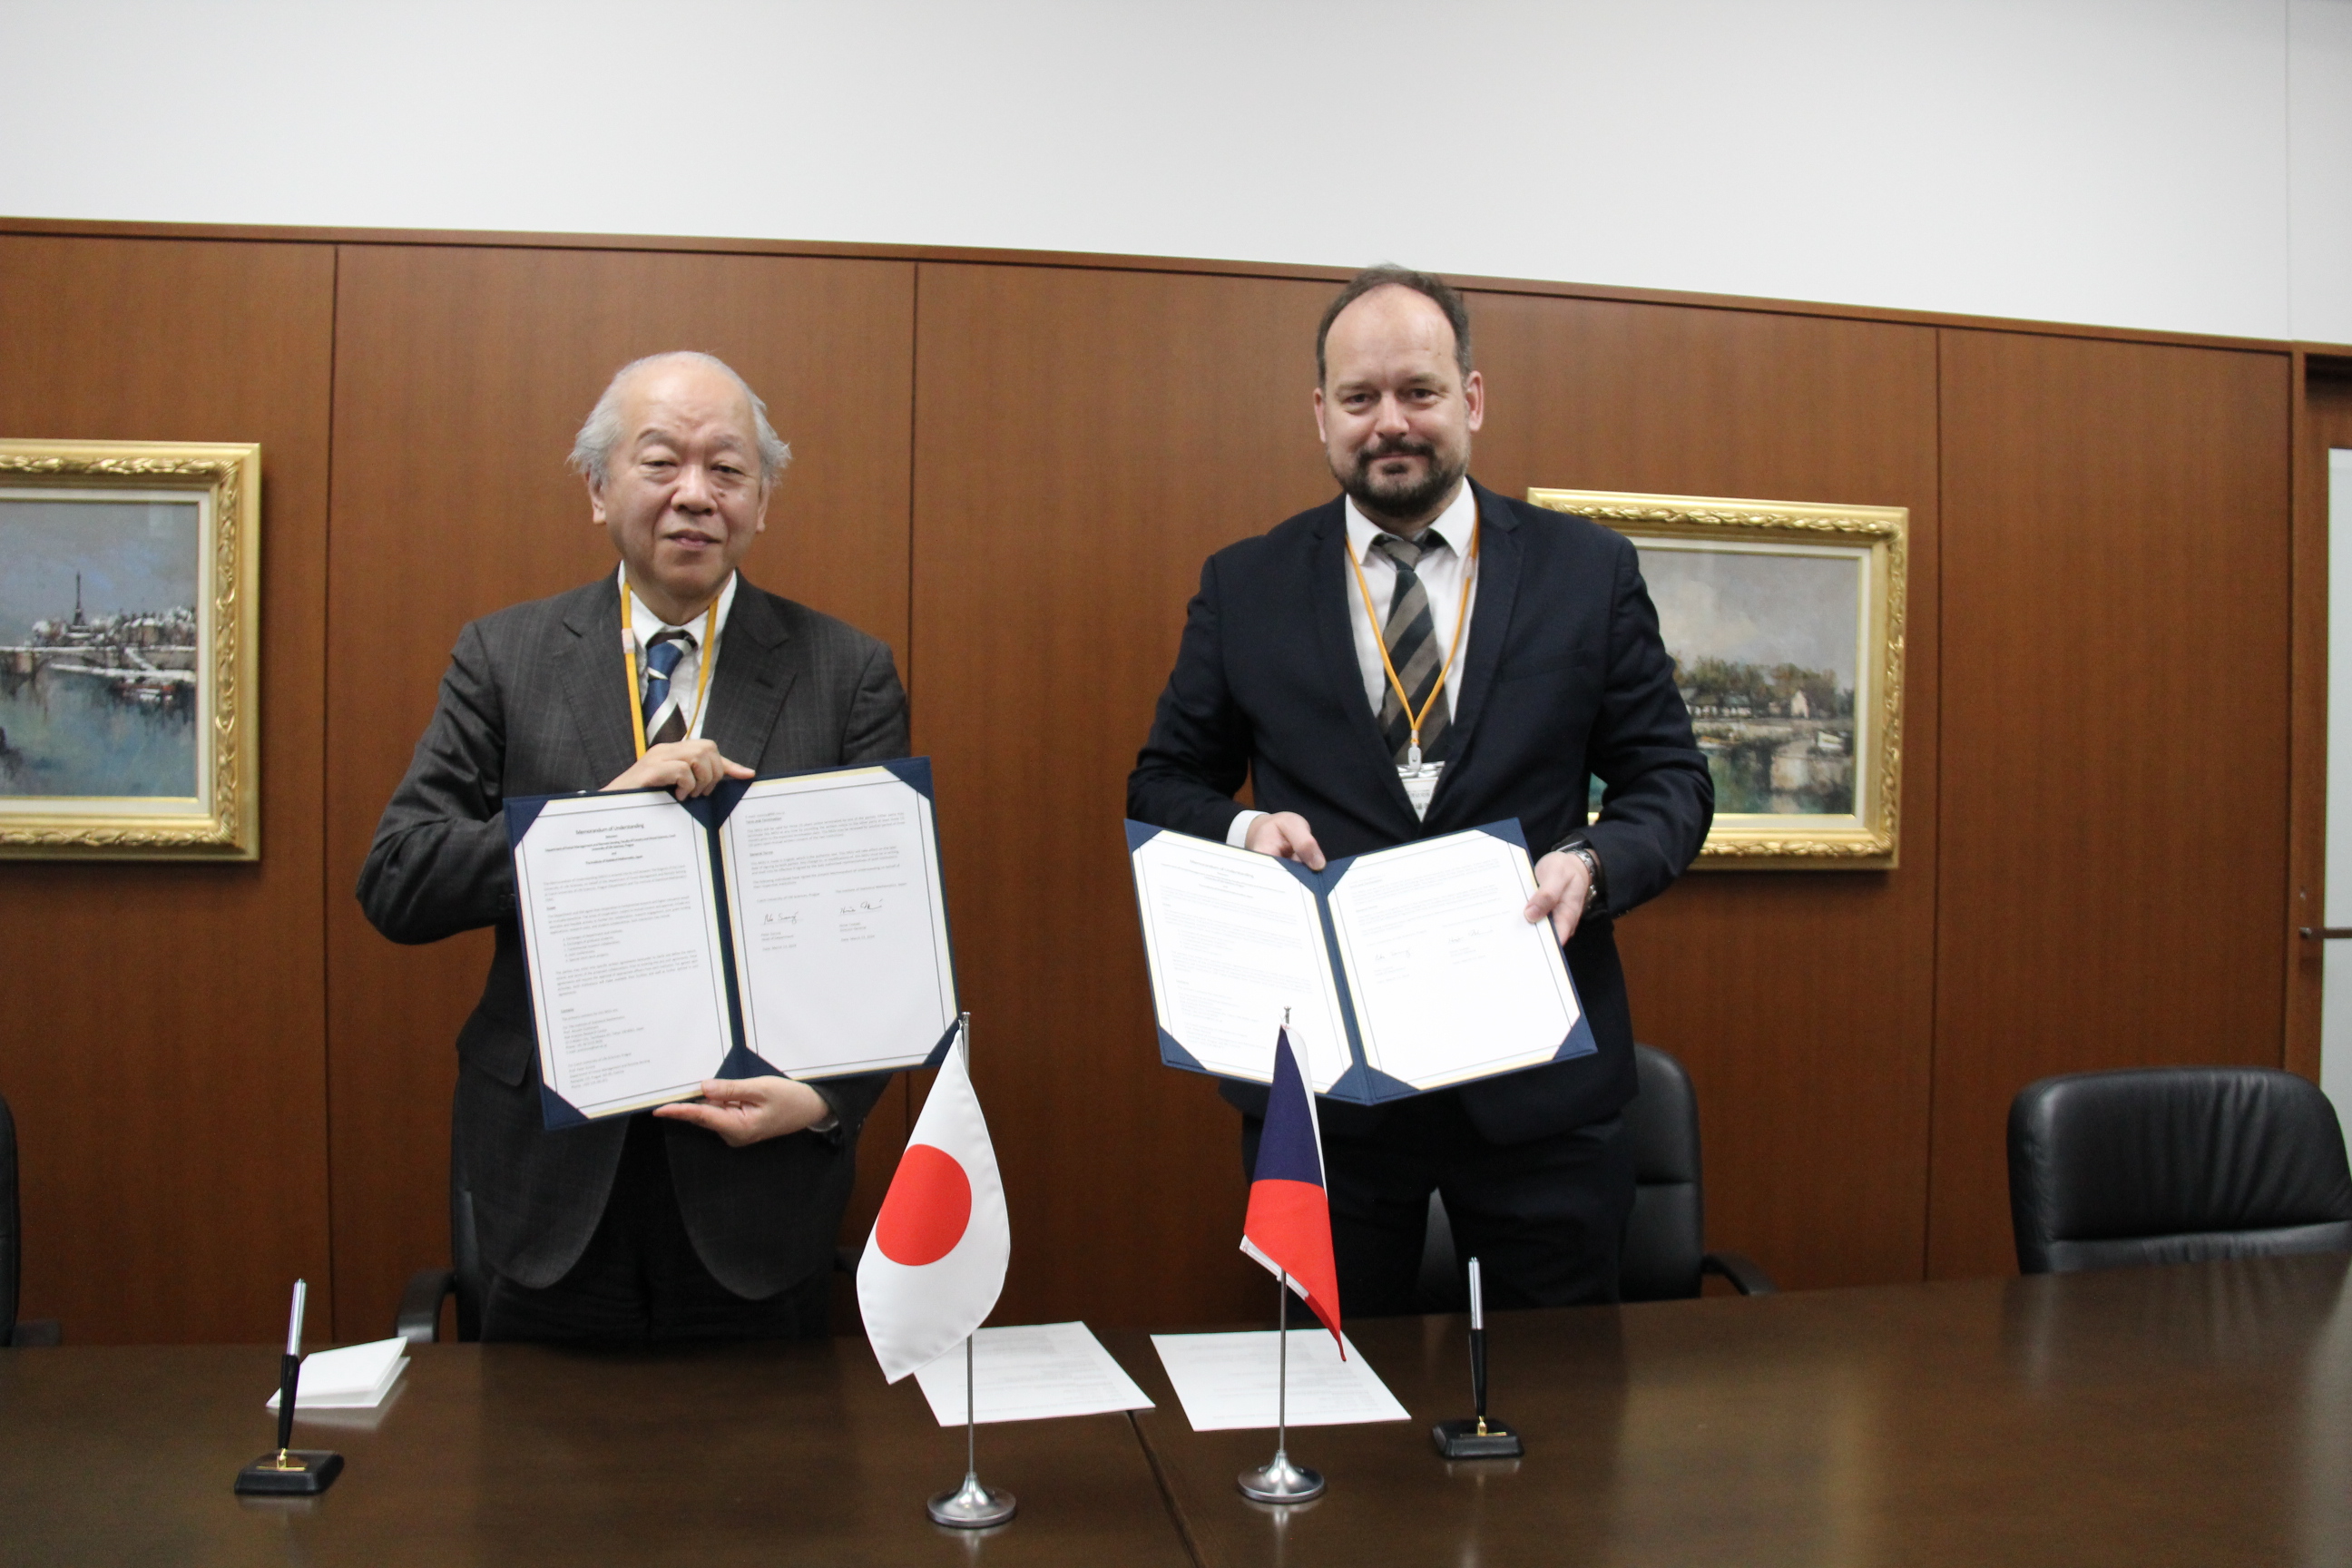 Prof. Tsubaki, Director-General and Prof. Surovy signed the MOU